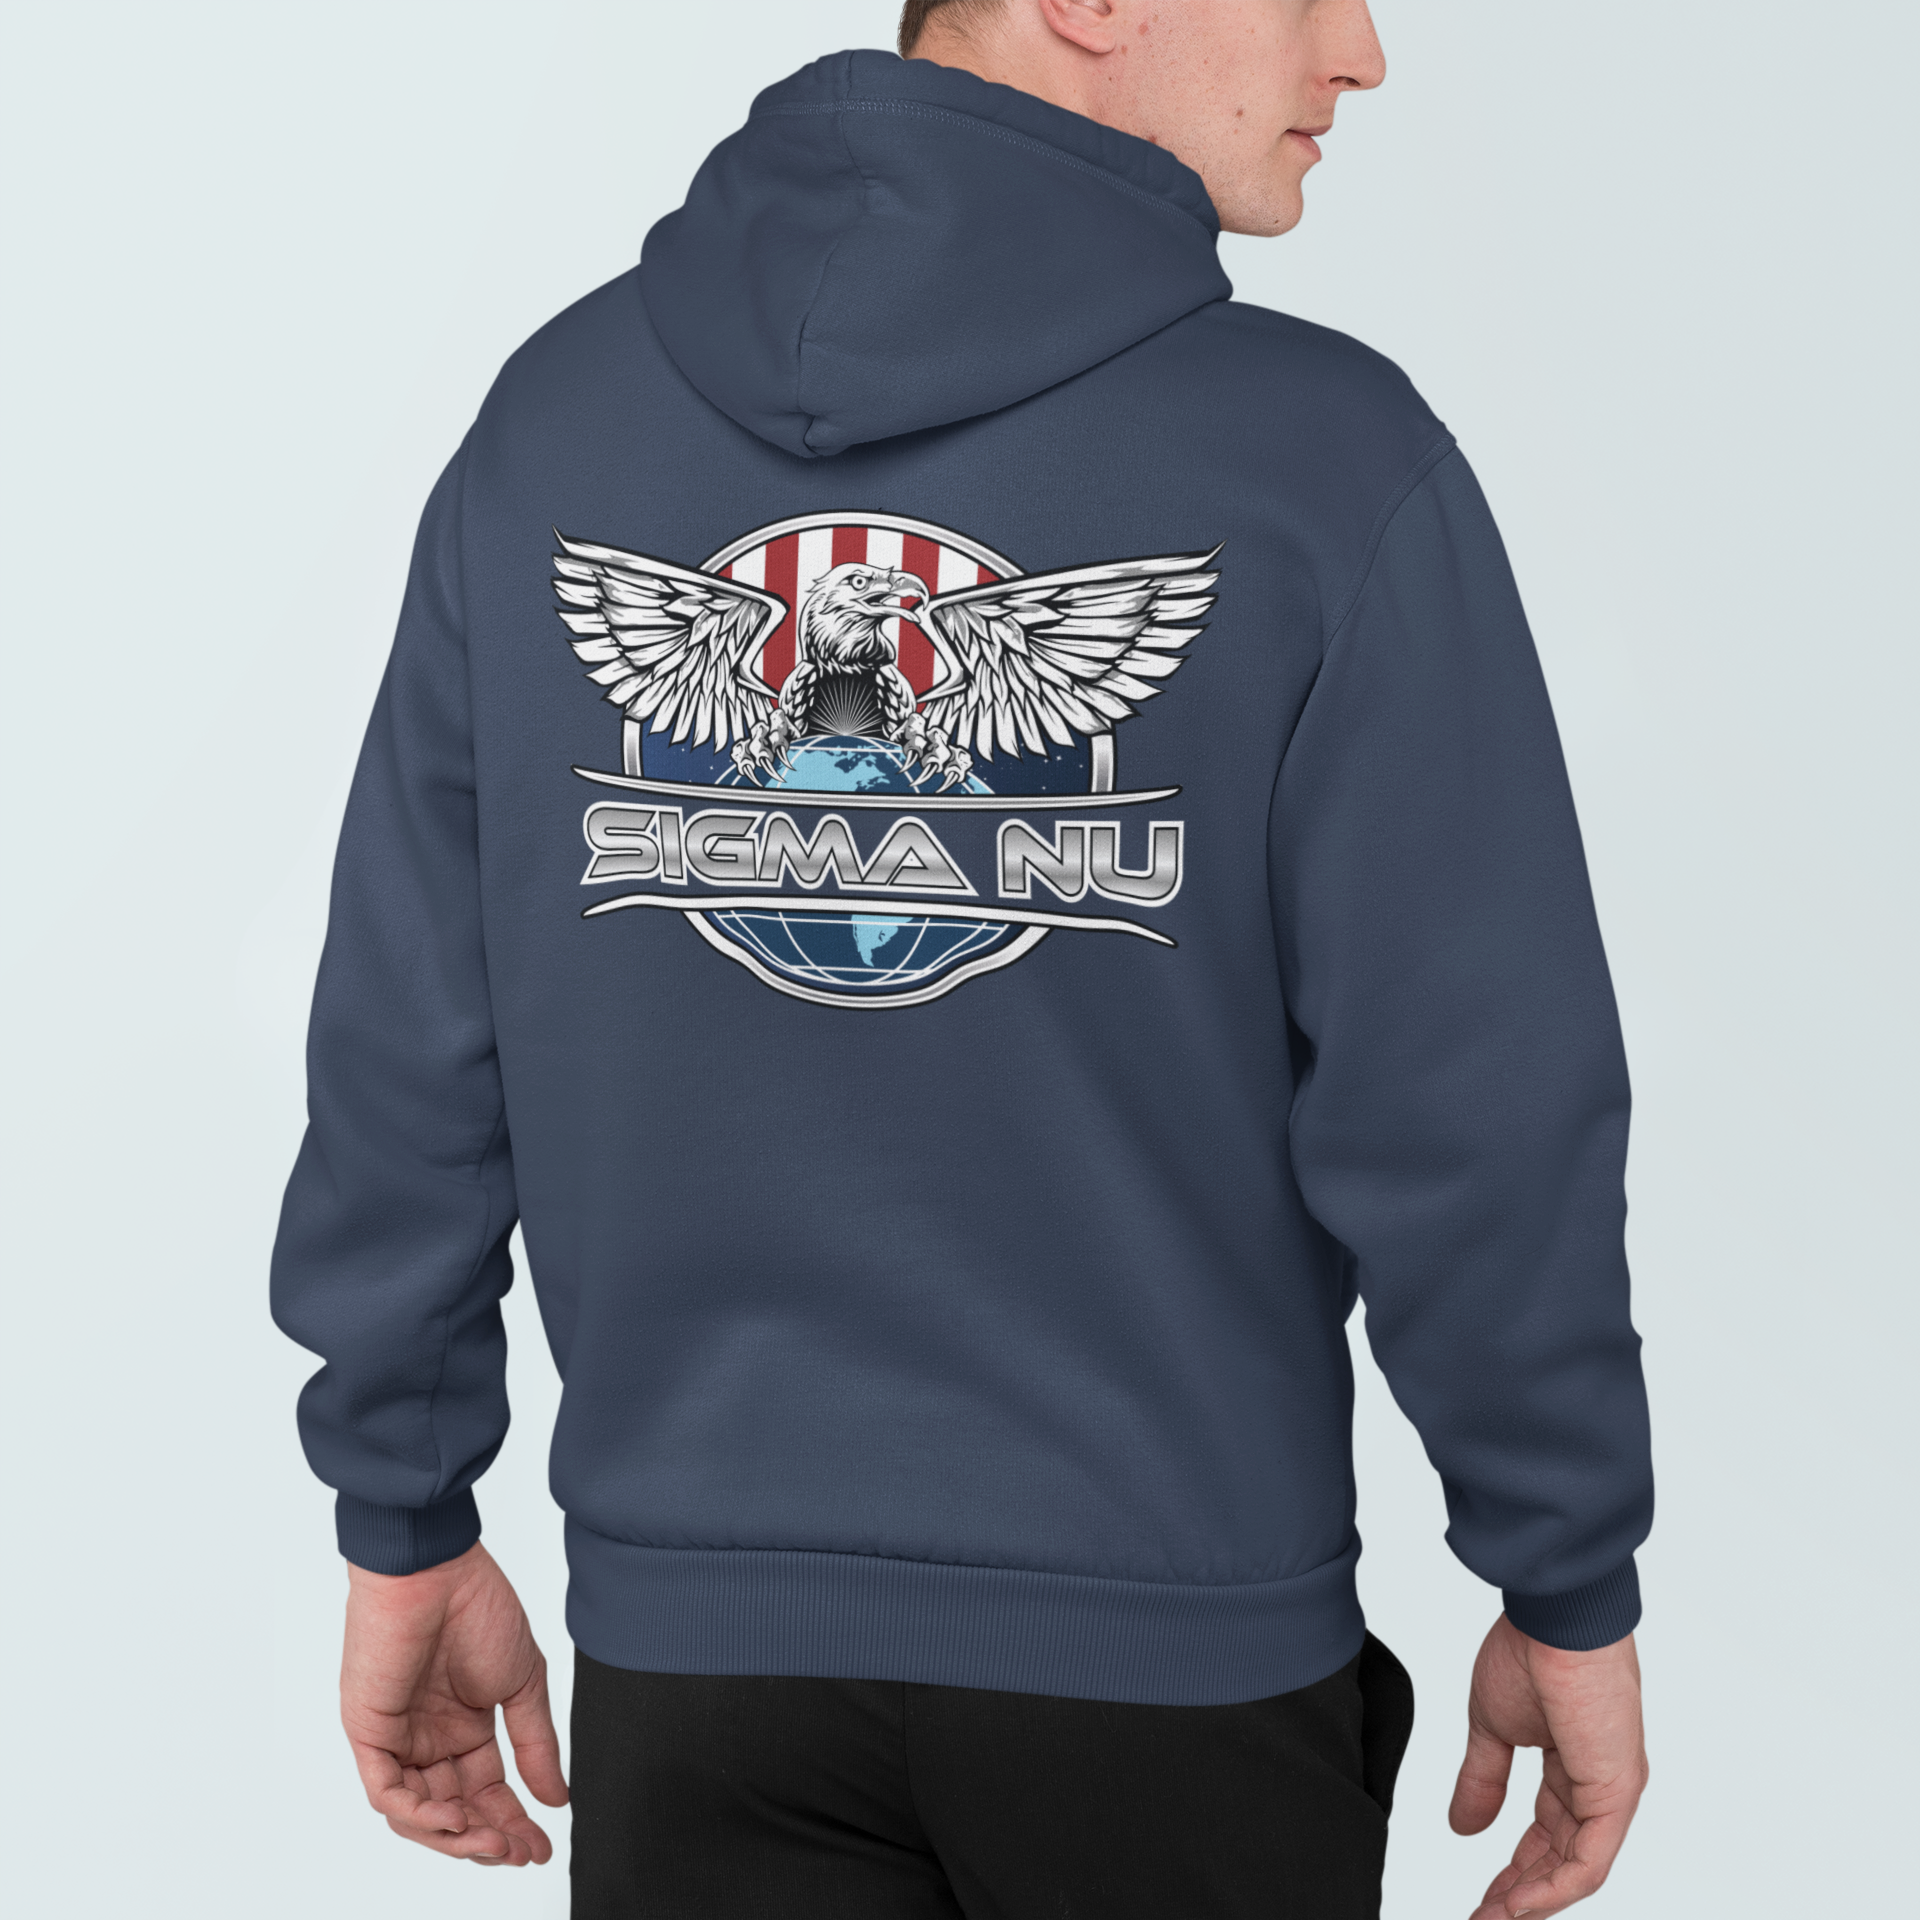 Sigma Nu Graphic Hoodie | The Fraternal Order | Sigma Nu Clothing, Apparel and Merchandise model 